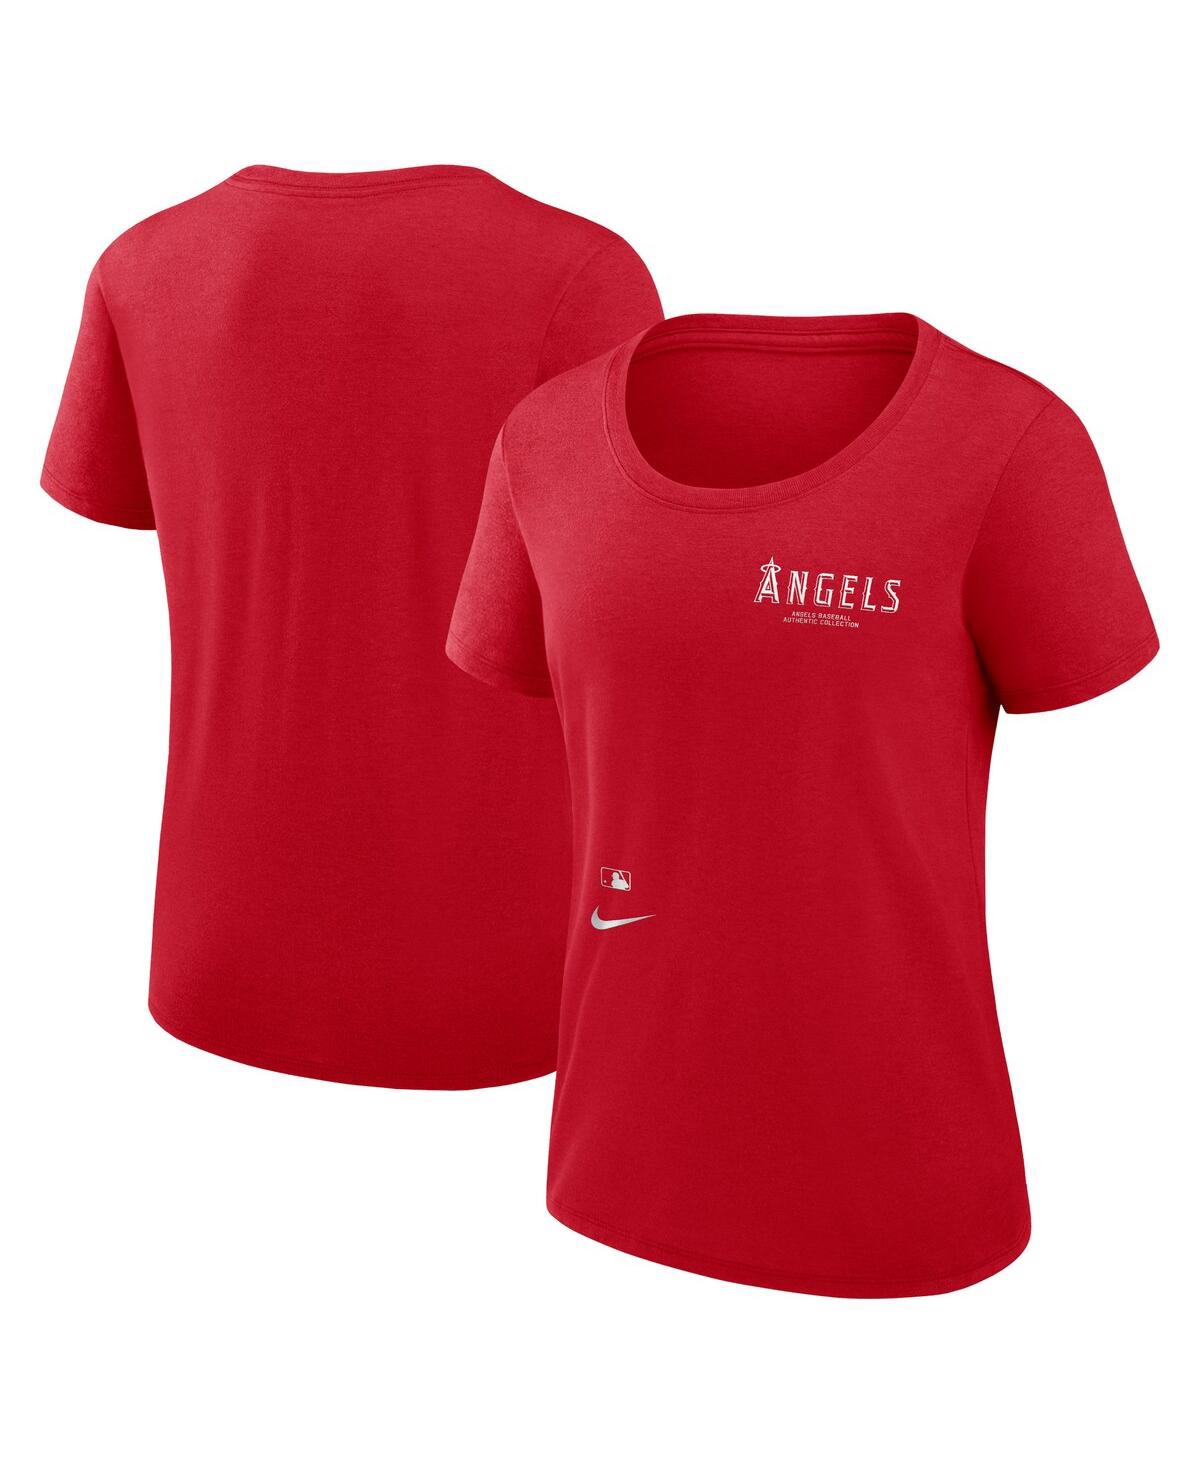 Women's Nike Red Los Angeles Angels Authentic Collection Performance Scoop Neck T-shirt - Red